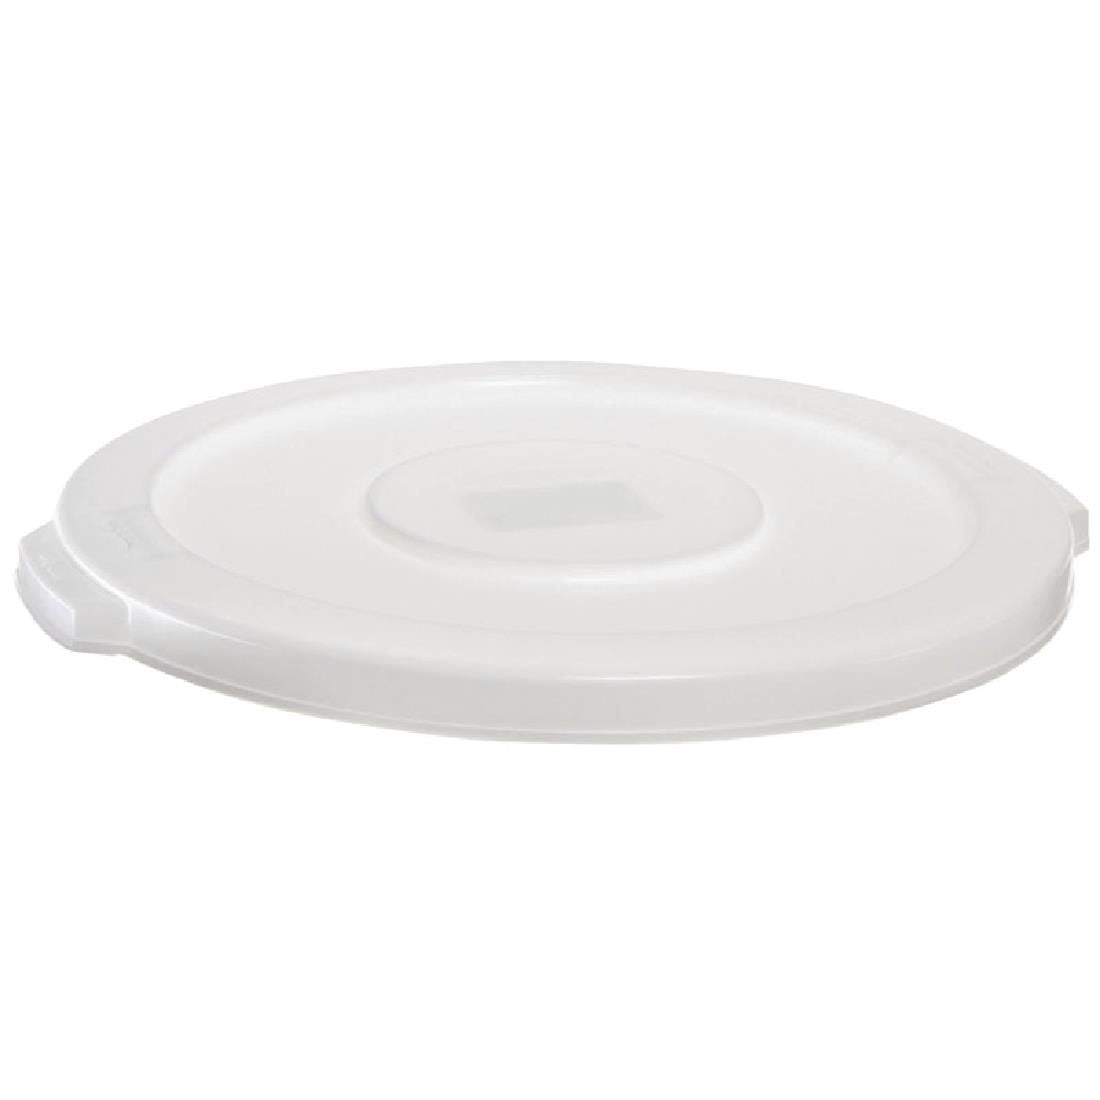 L663 Rubbermaid Round Brute Container Lid 75.7Ltr